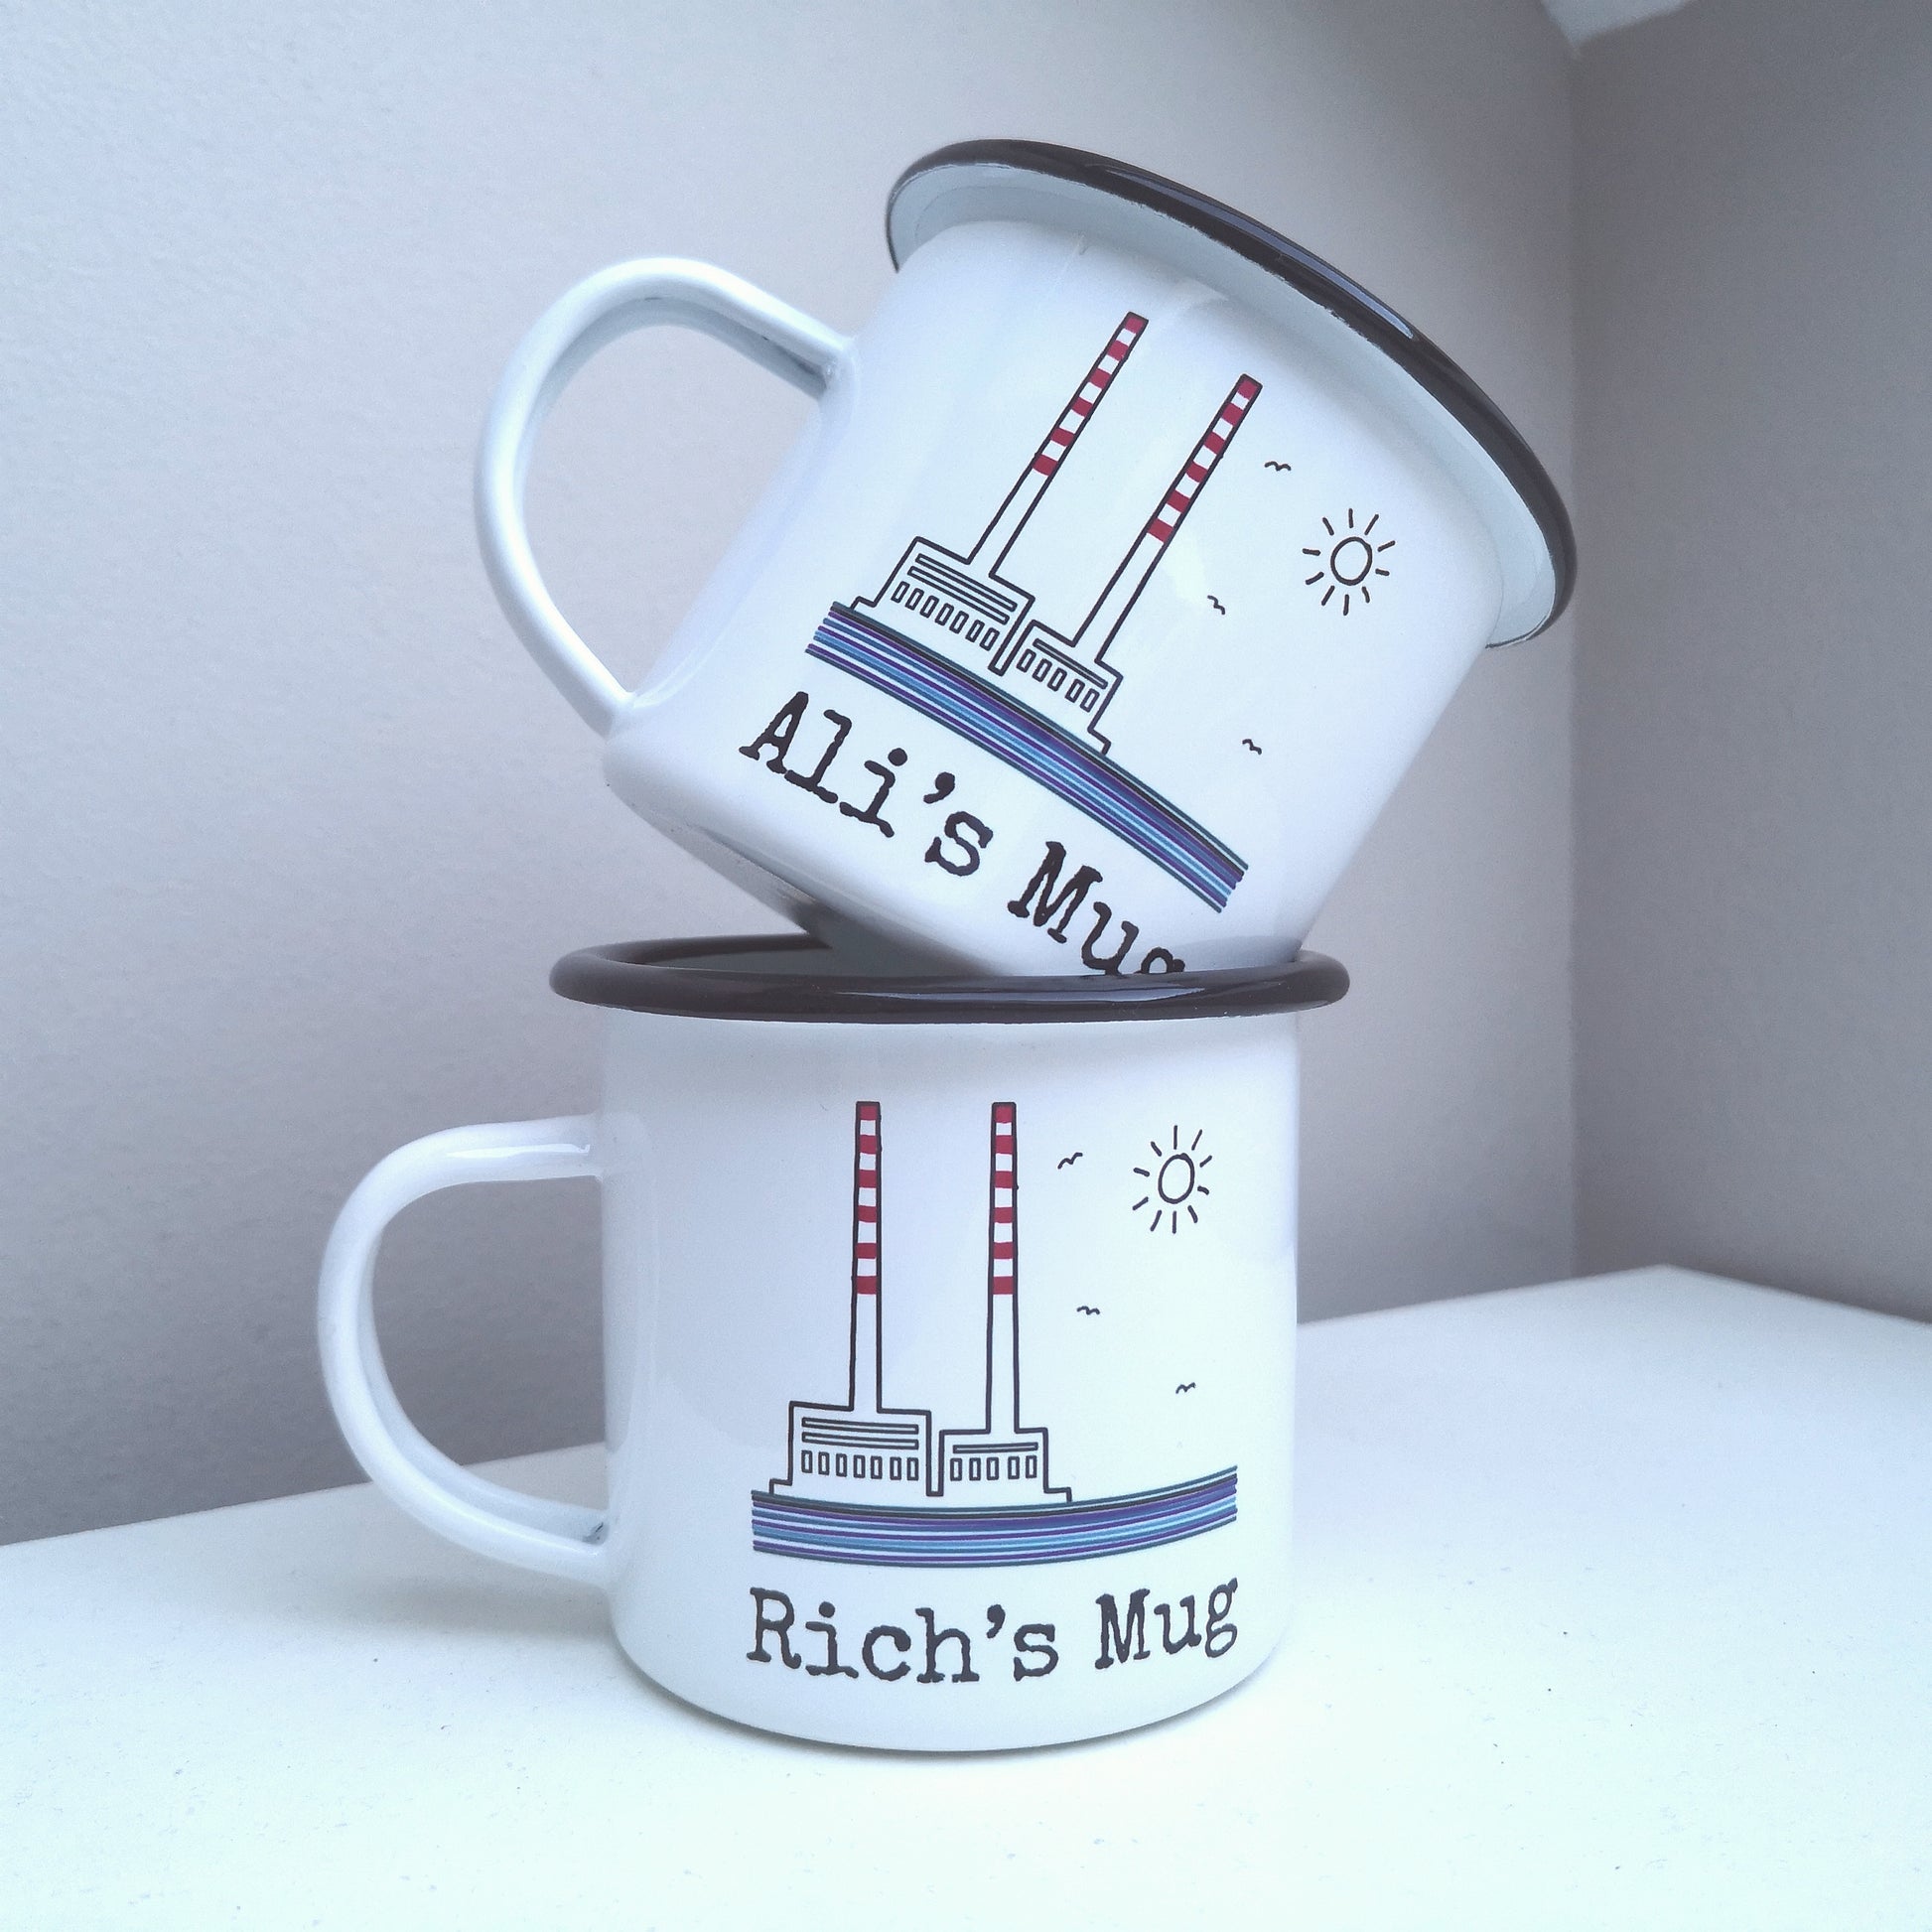 A photo showing 2 personalised white steel enamel mug with a hand drawn picture of the Poolbeg towers on it. The mugs are stacked on top of each other.